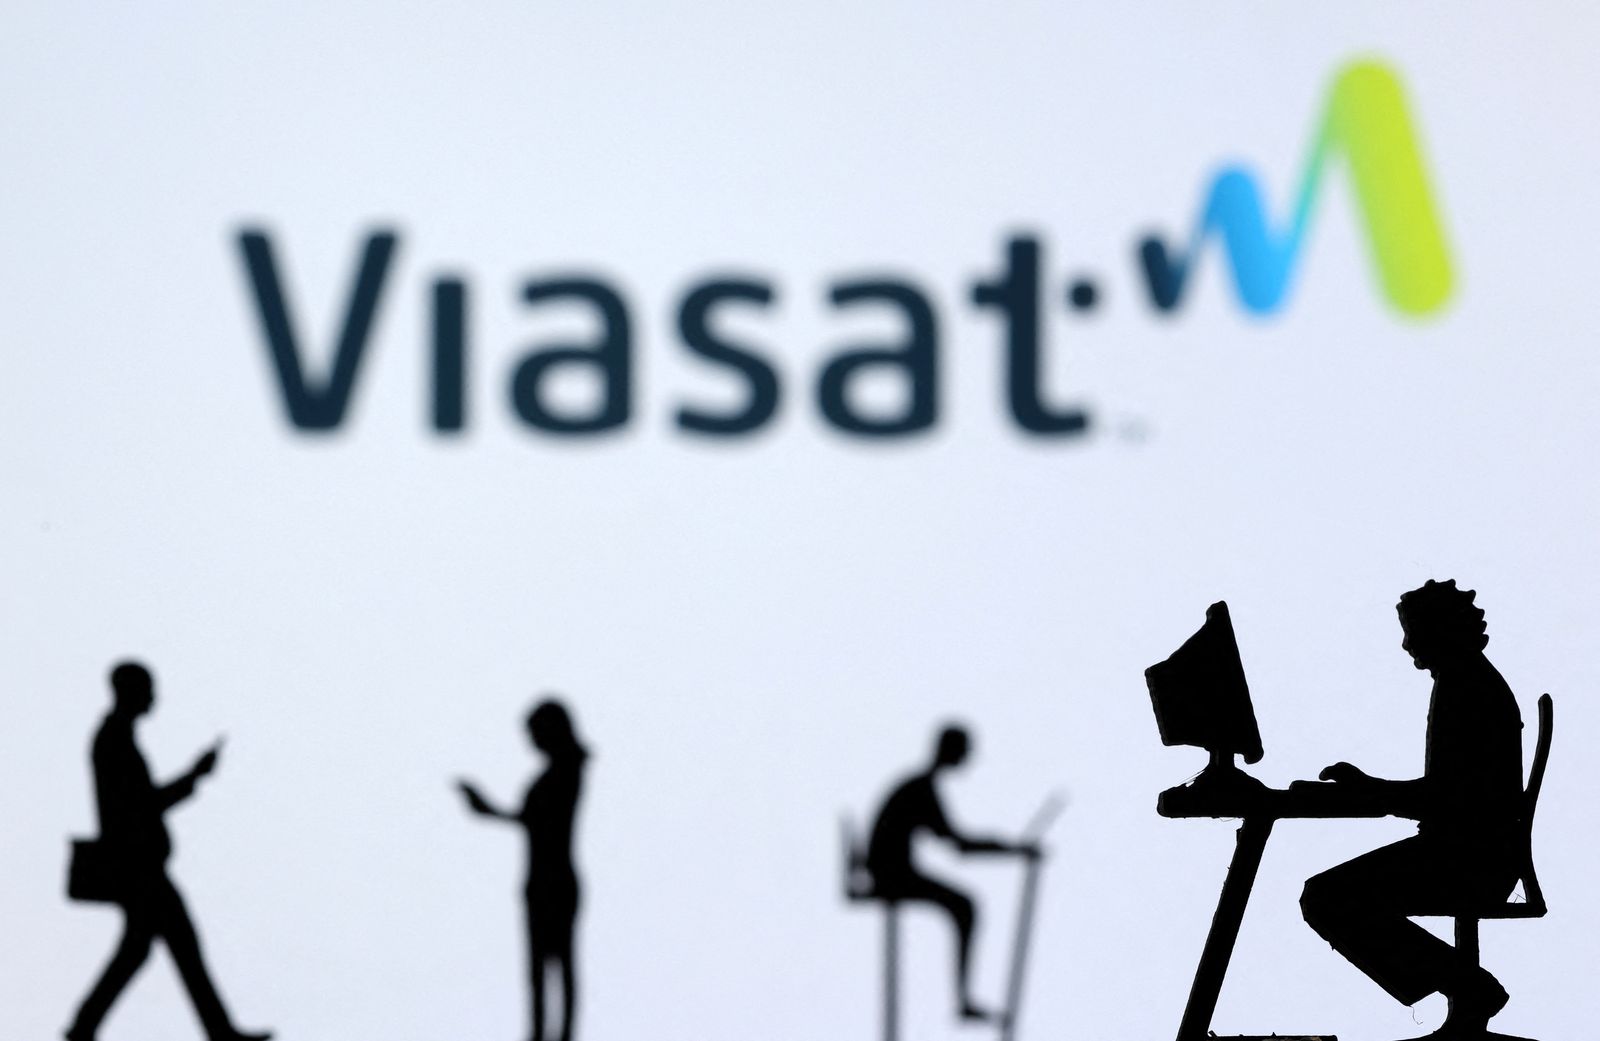 FILE PHOTO: Illustration shows small toy figures with laptops and smartphones in front of displayed Viasat Internet logo - REUTERS